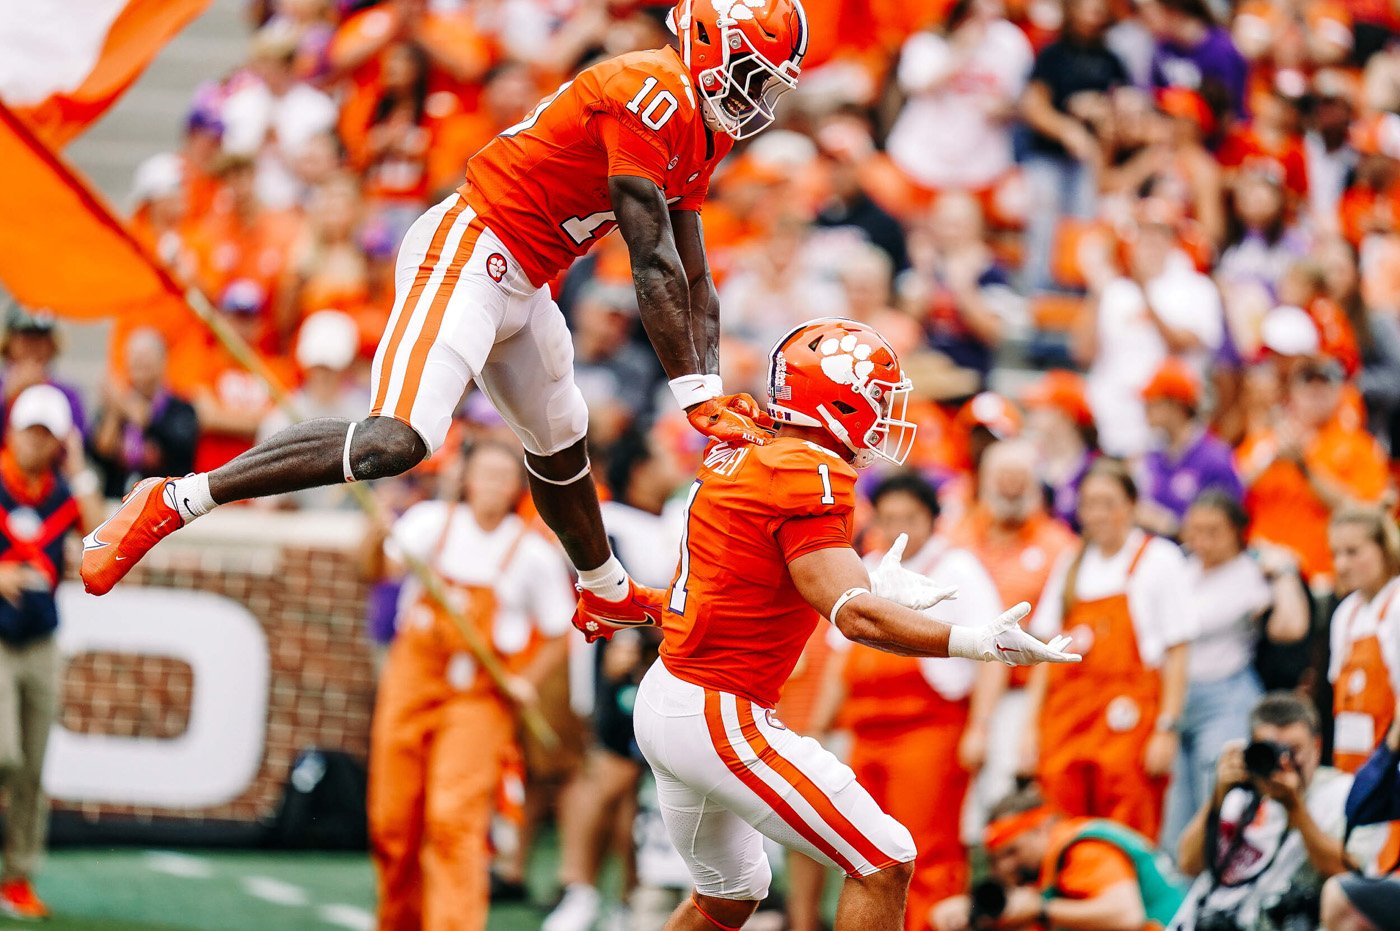 College Football – Clemson opens with win over Furman – SPORTS VIEW